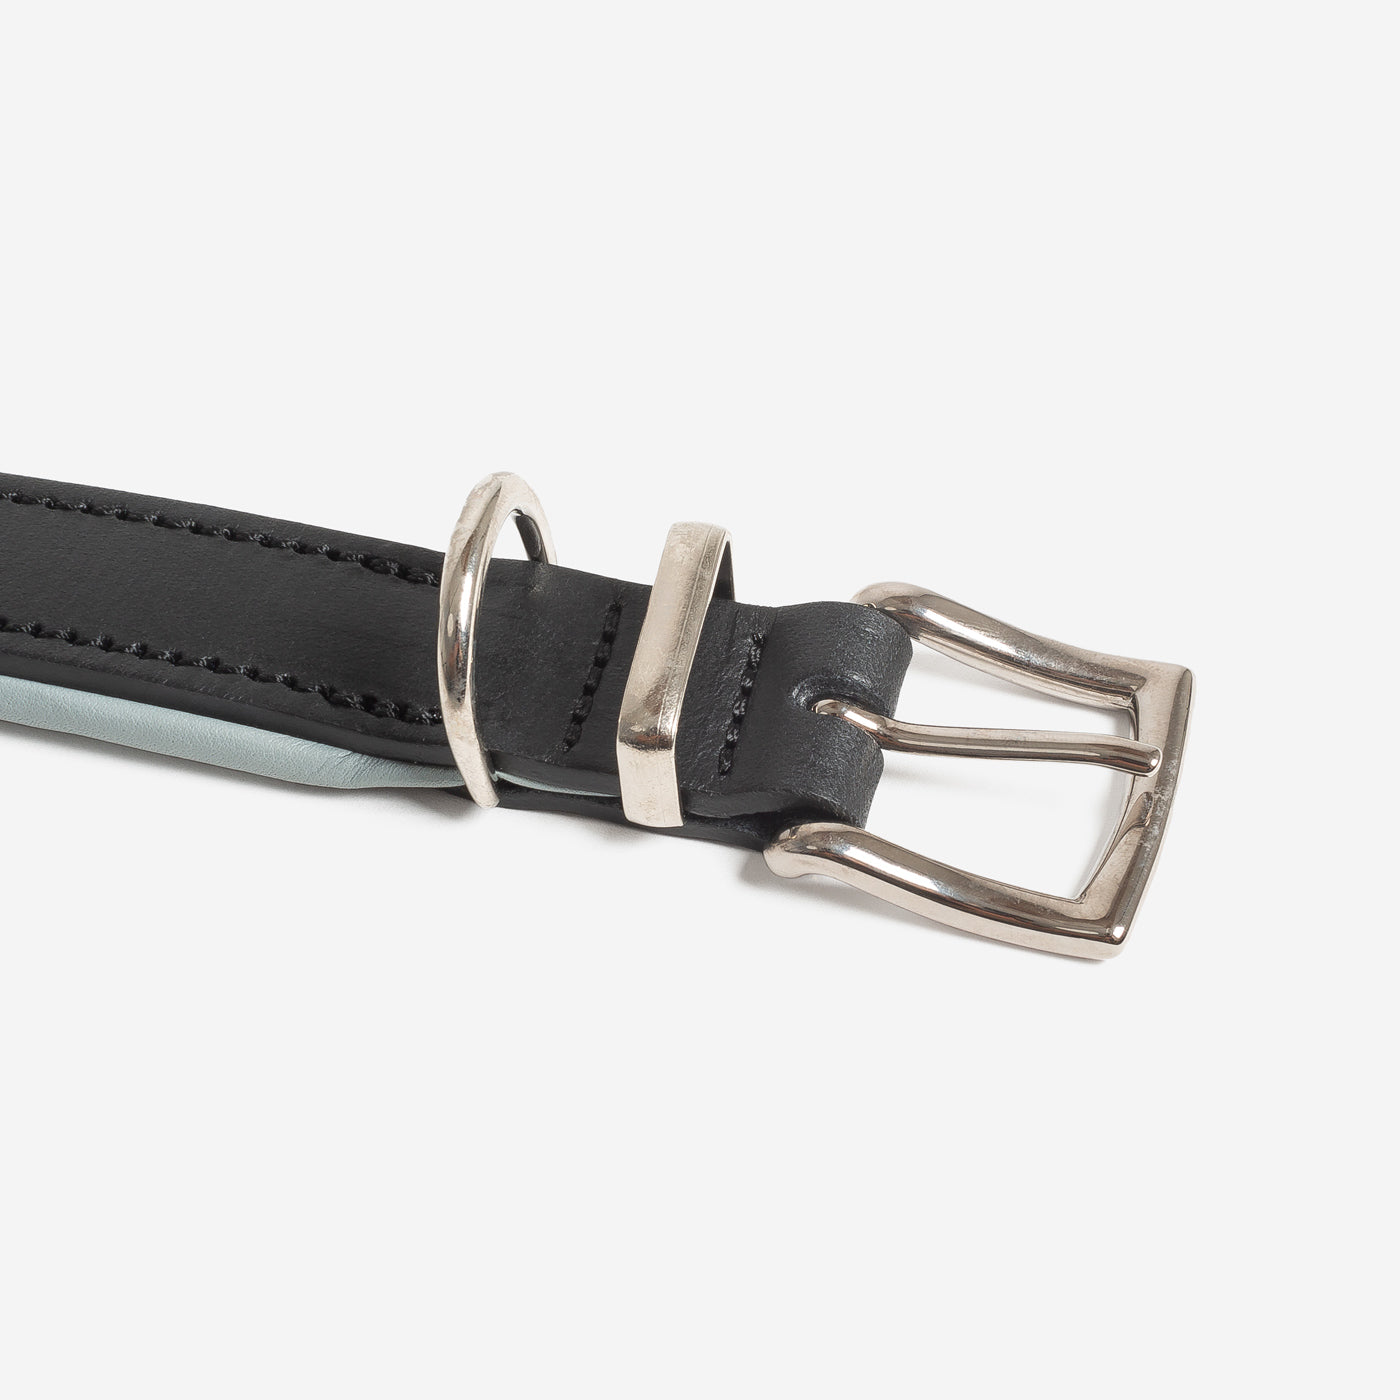 Discover dog walking luxury with our handcrafted Italian padded leather dog collar in Black & Grey! The perfect collar for dogs available now at Lords & Labradors US